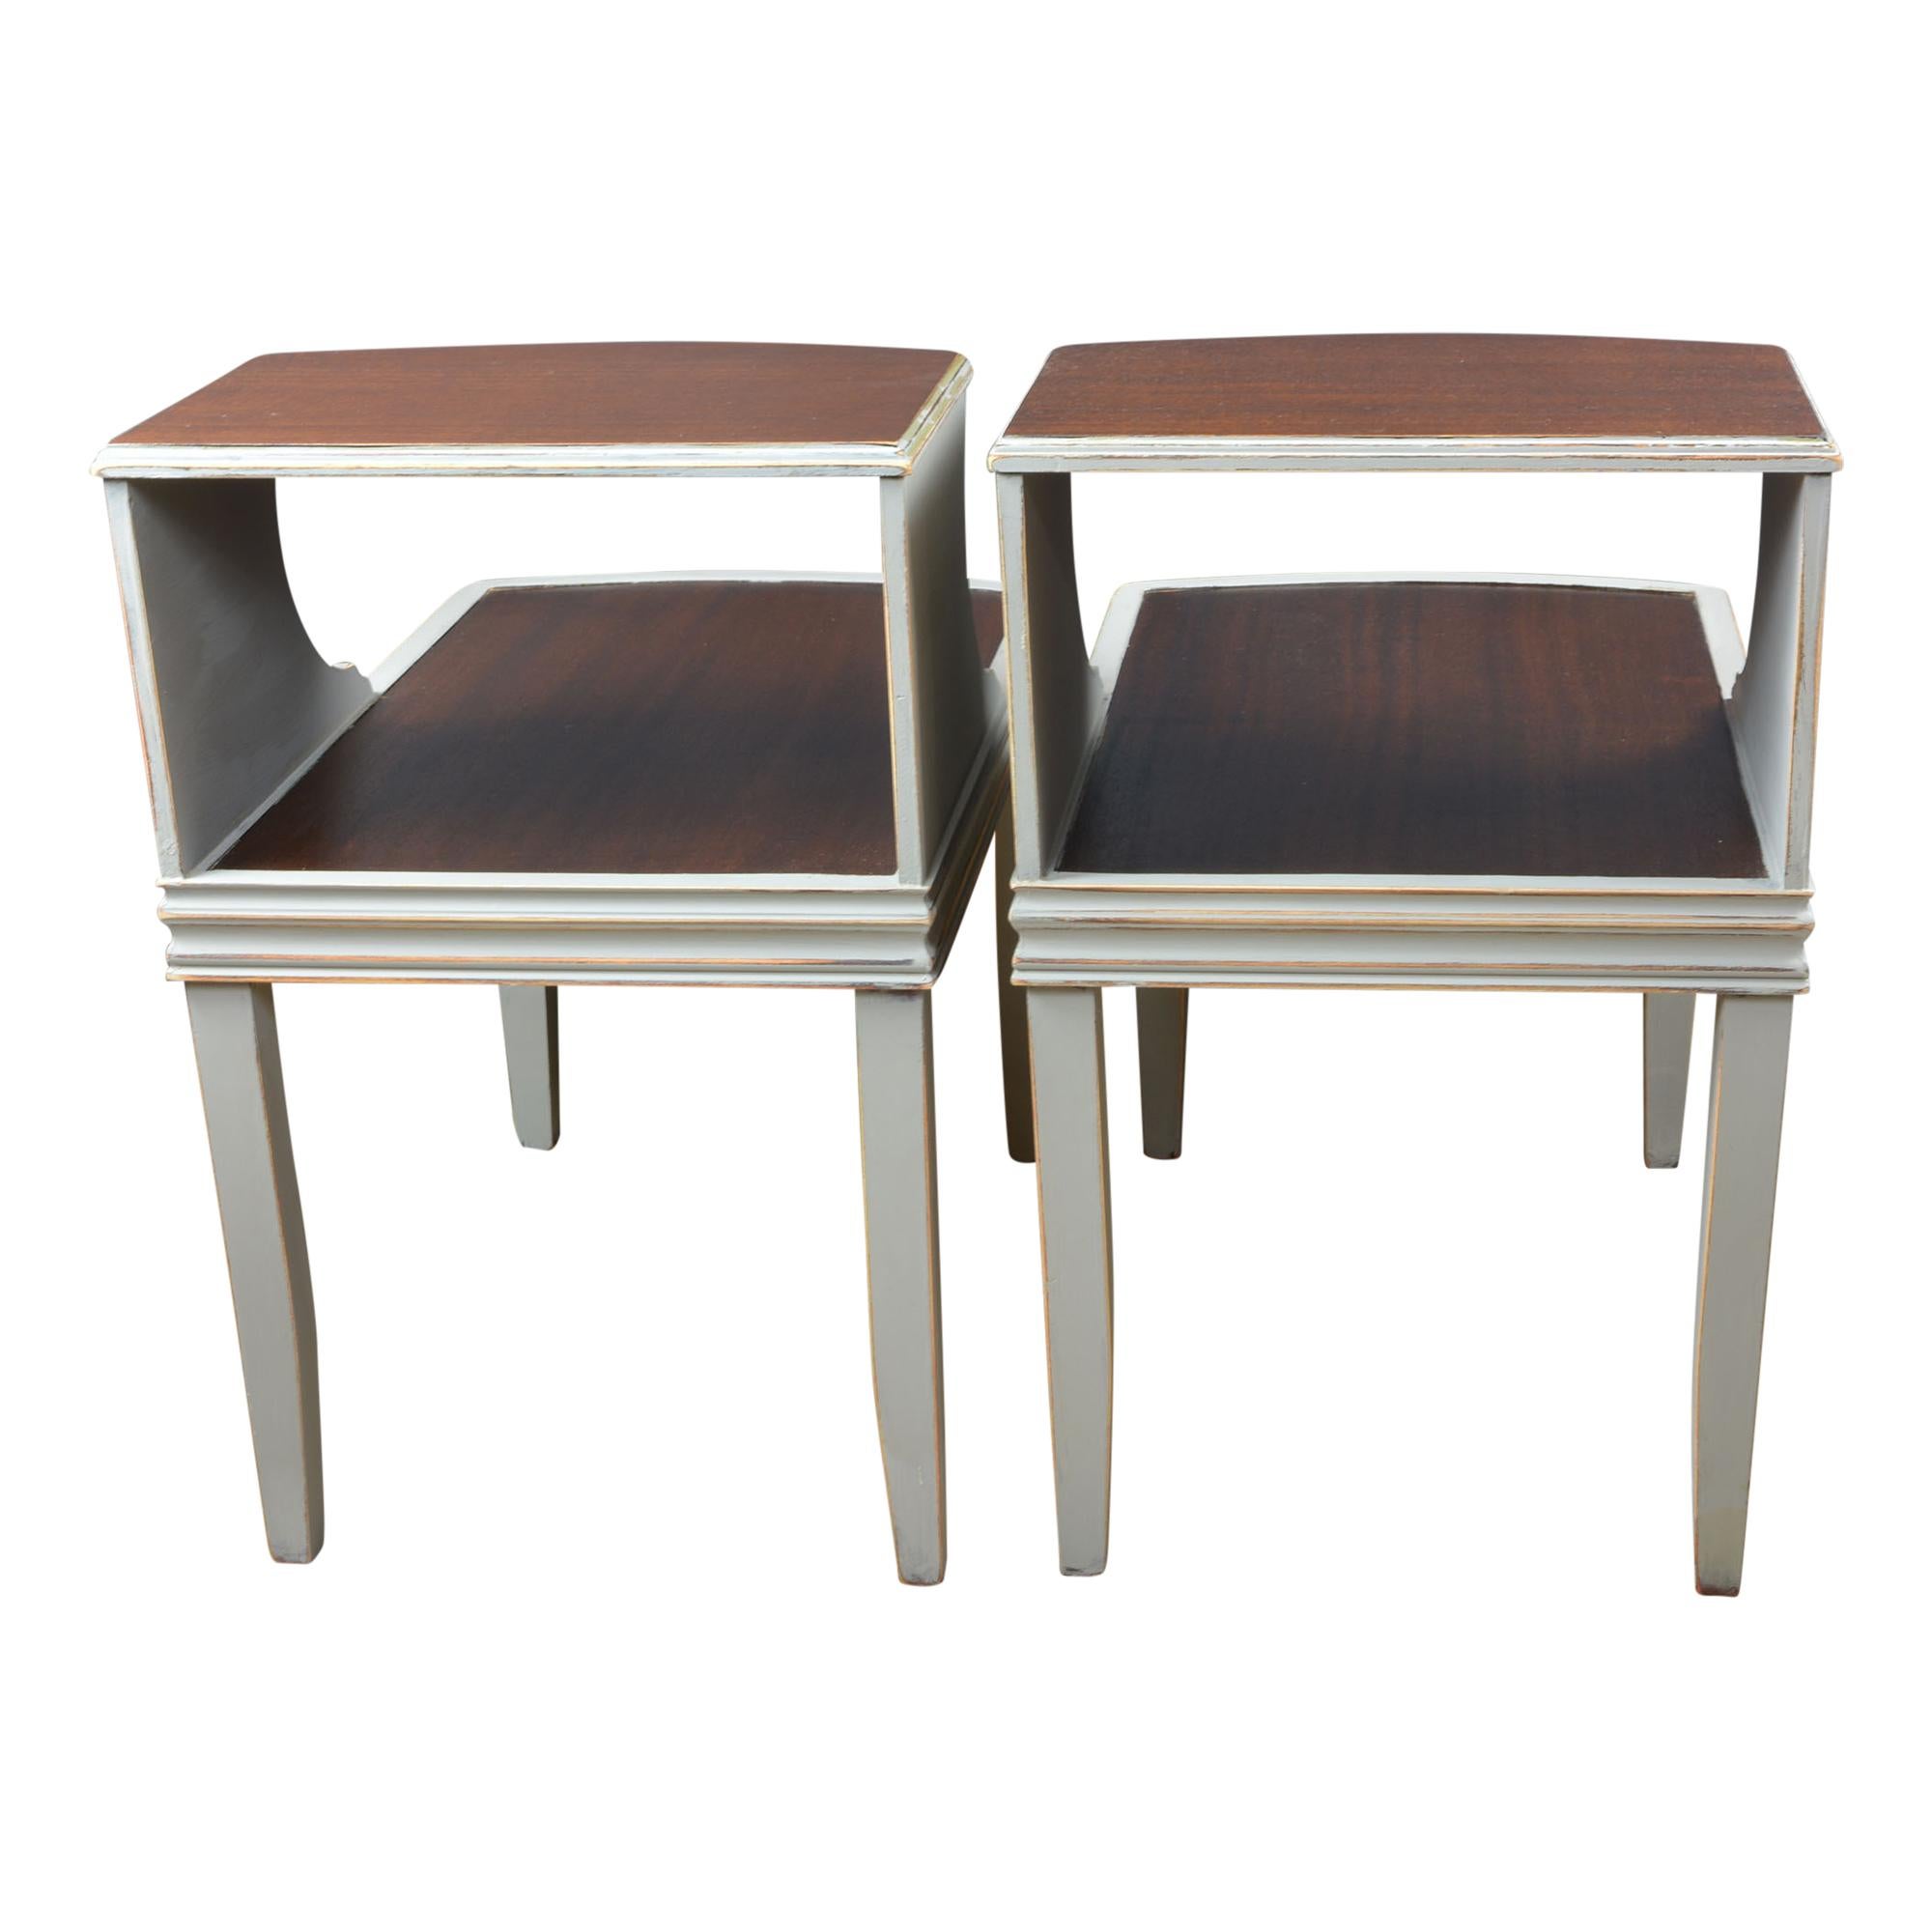 Wood Mid-Century Modern End Tables Gray and Deep Brown, Pair